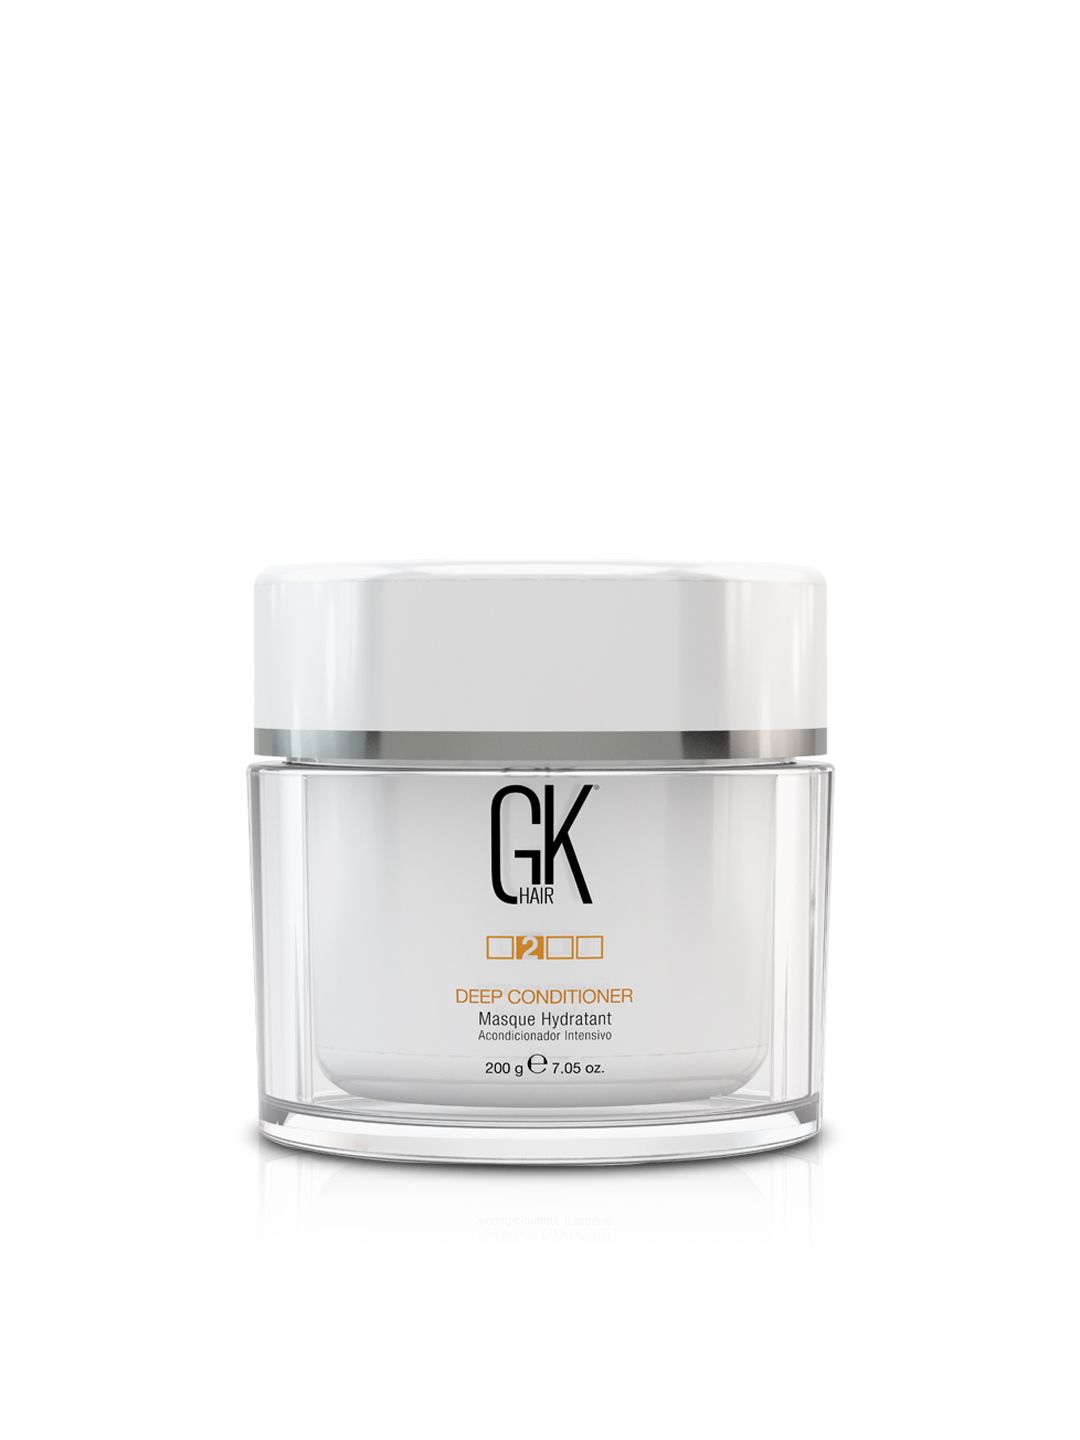 GK HAIR Deep Conditioner Global Keratin Hair Masque 200g Price in India